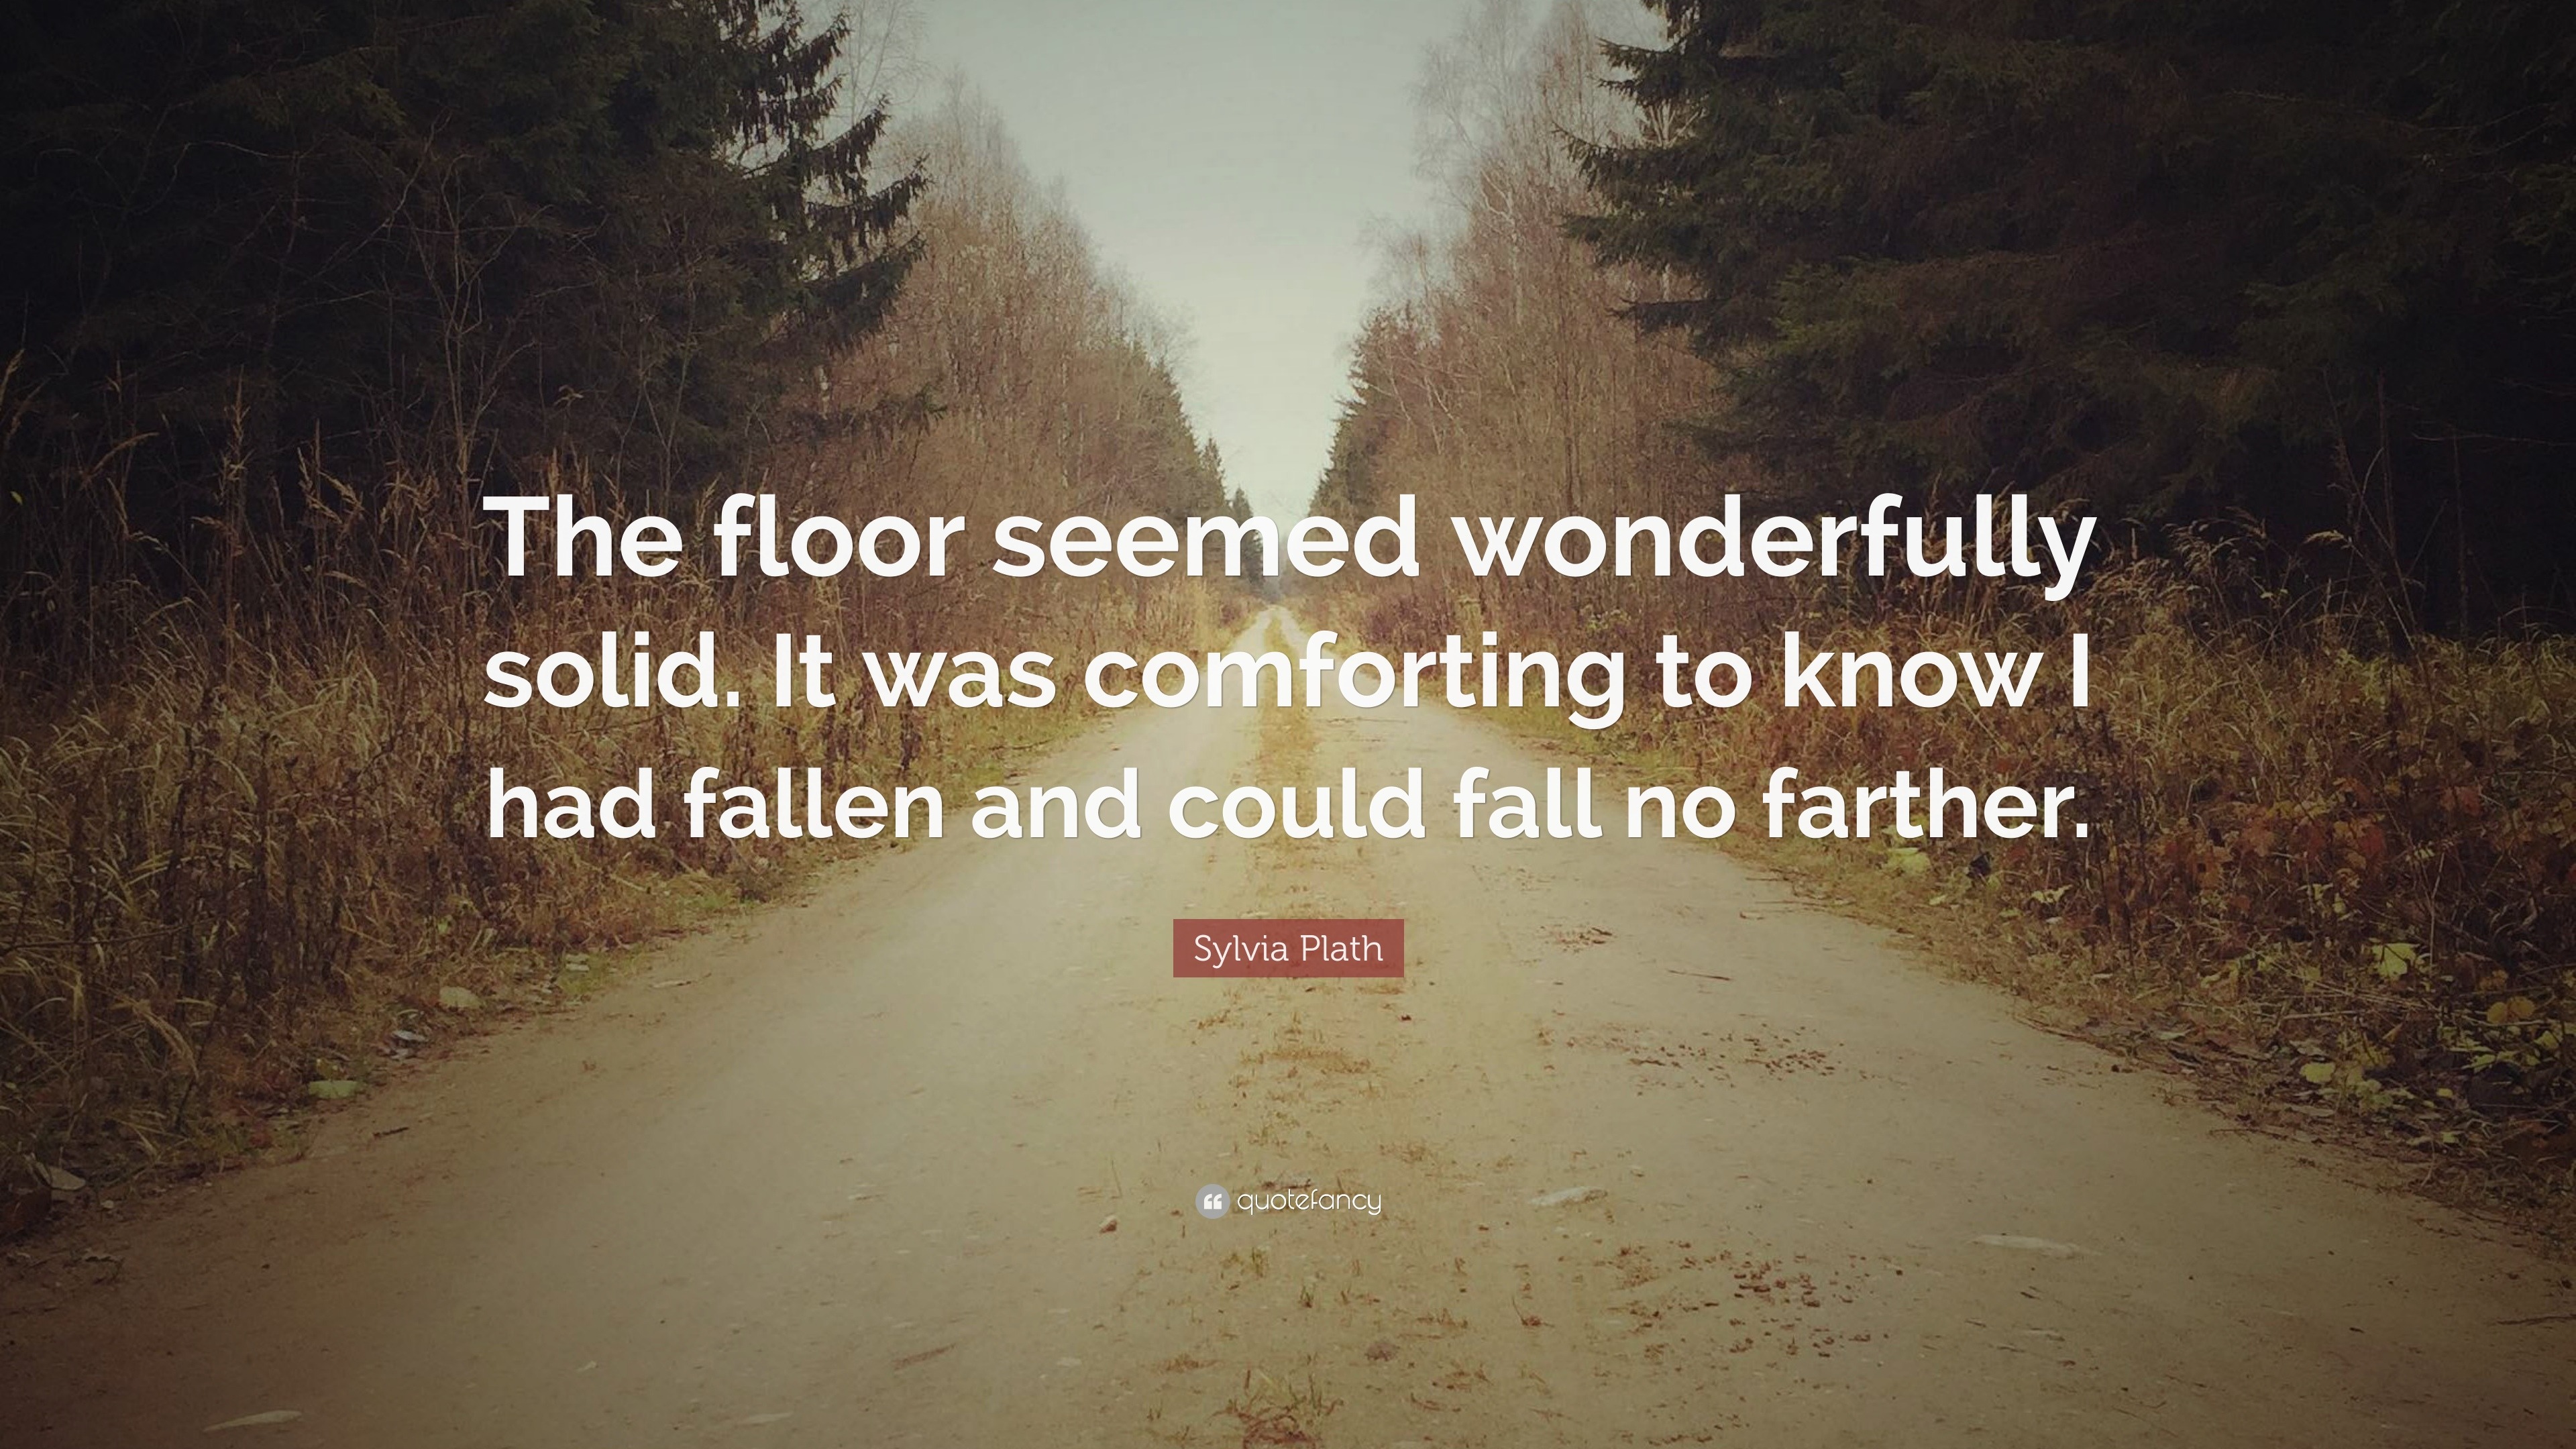 Sylvia Plath Quote: “The floor seemed wonderfully solid. It was